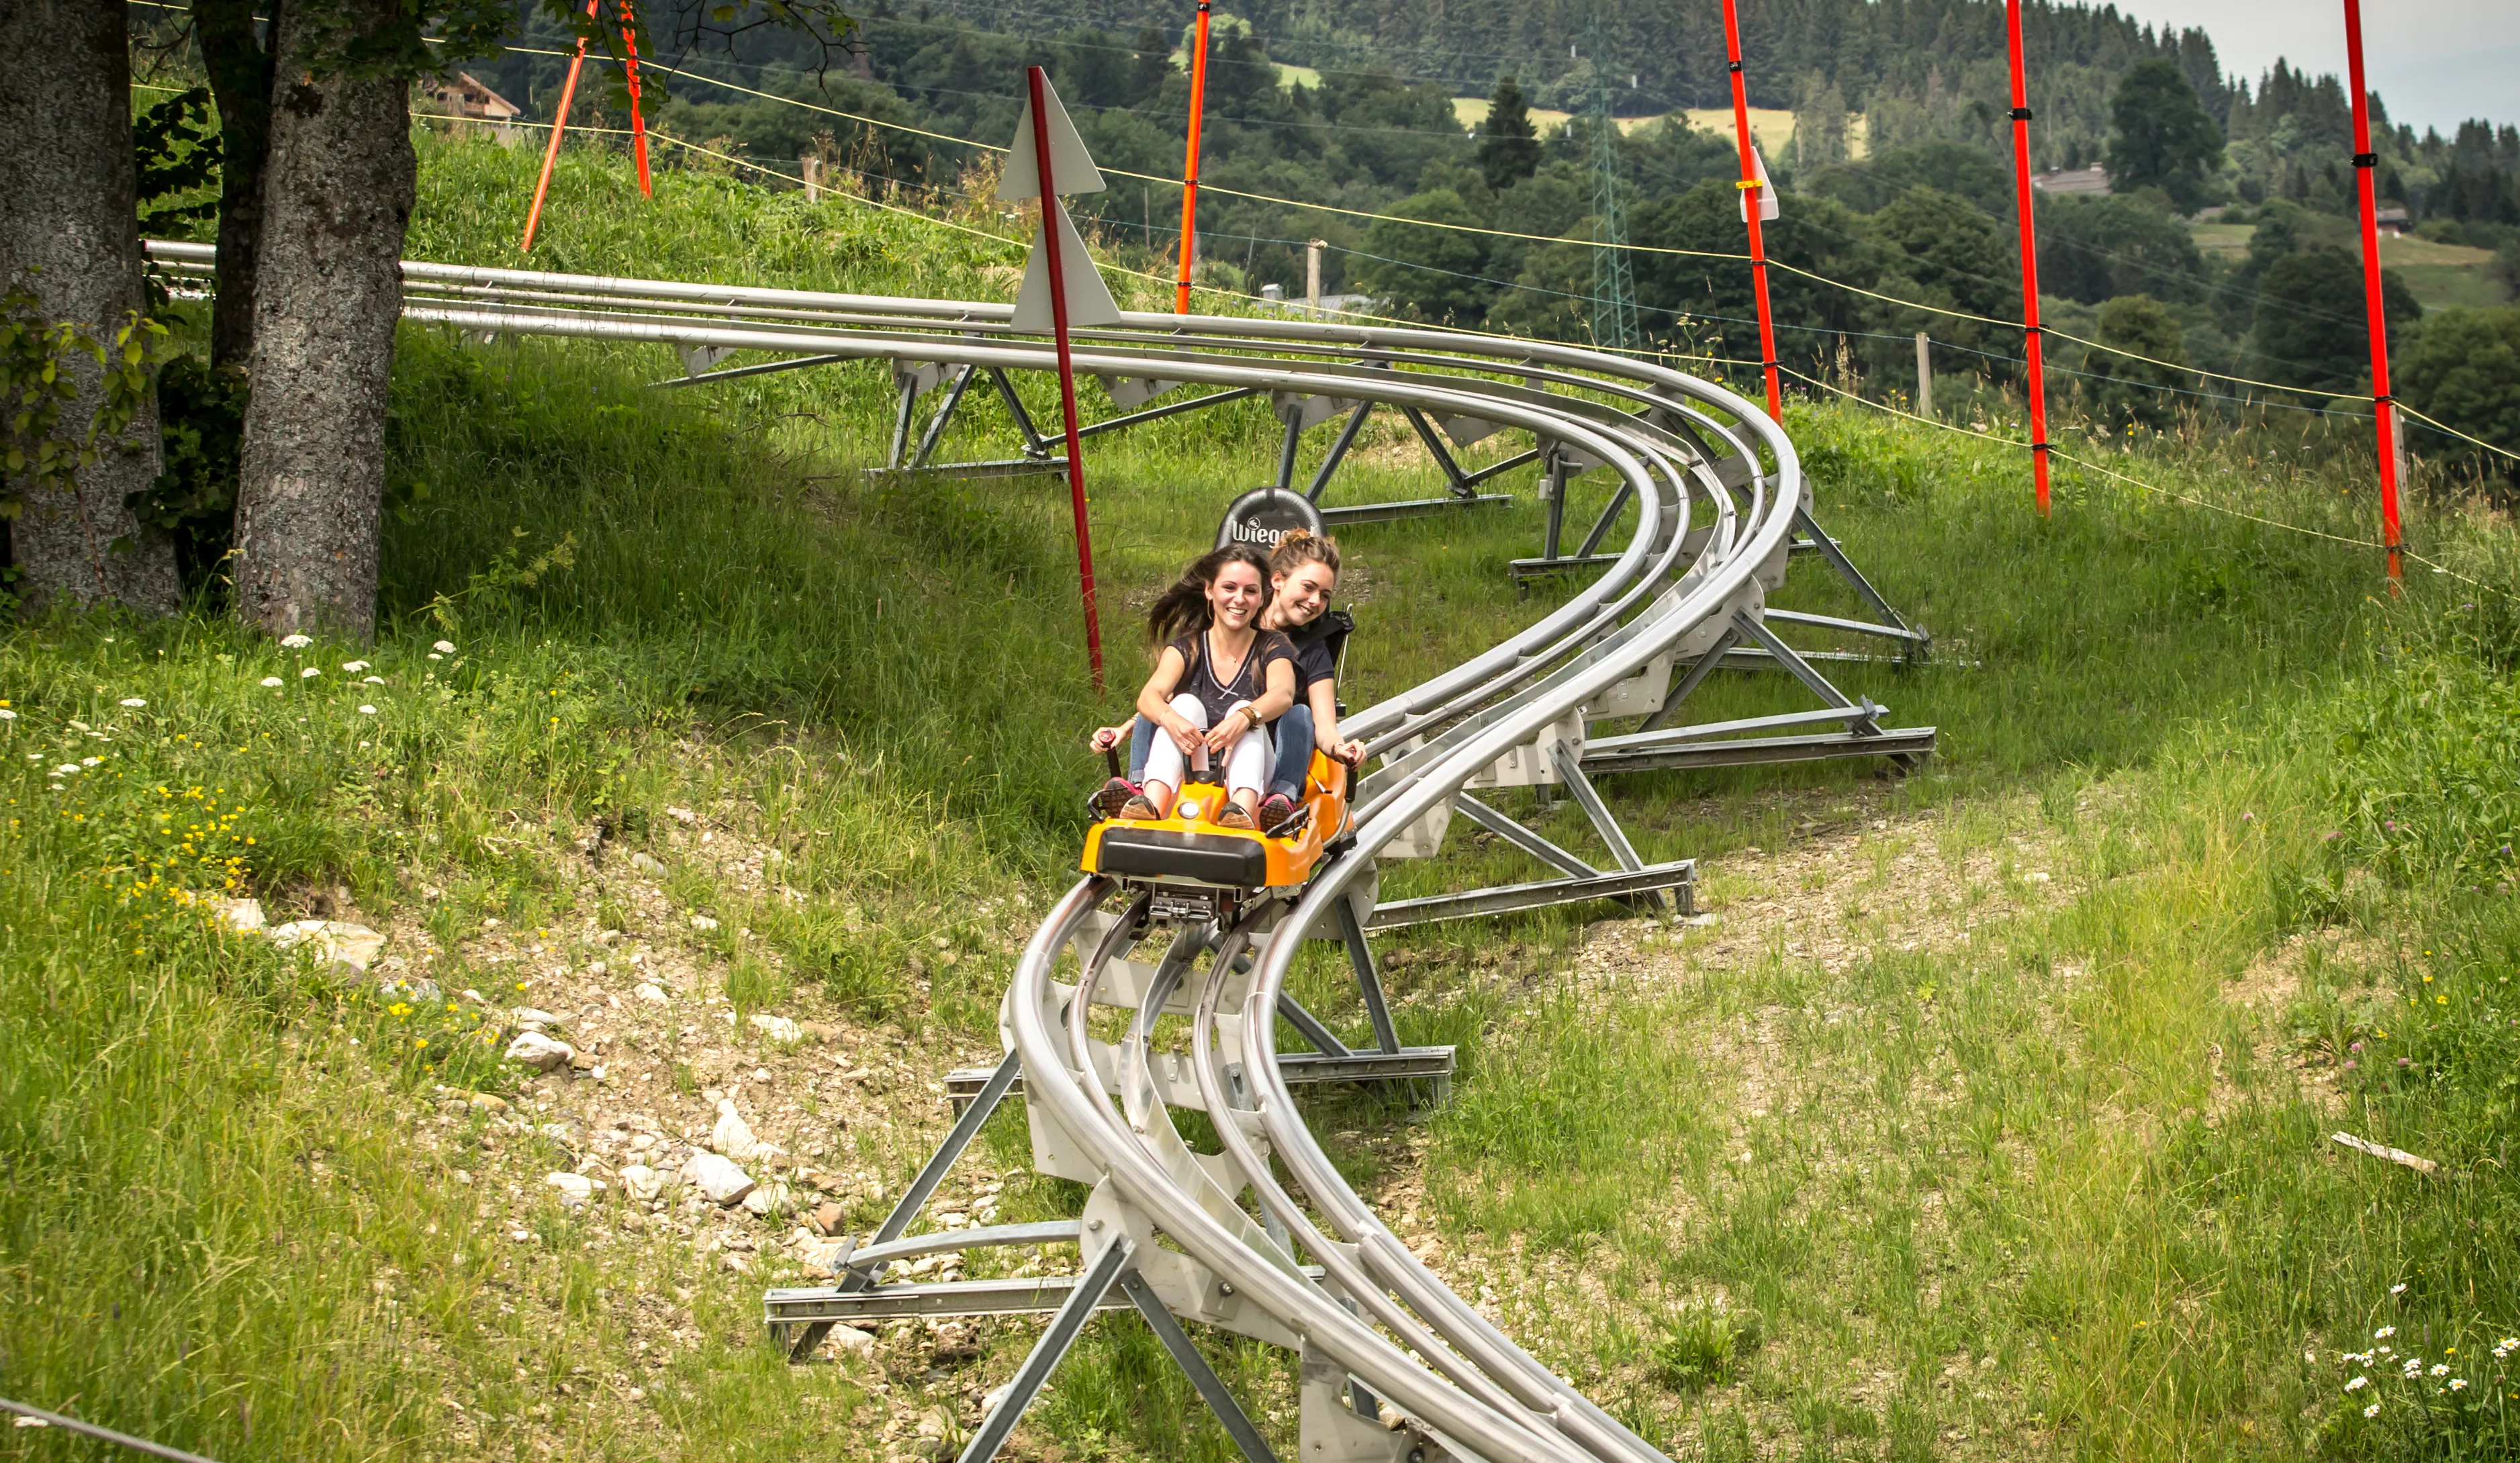 La Luge 4s in France, Europe | Amusement Parks & Rides - Rated 3.5